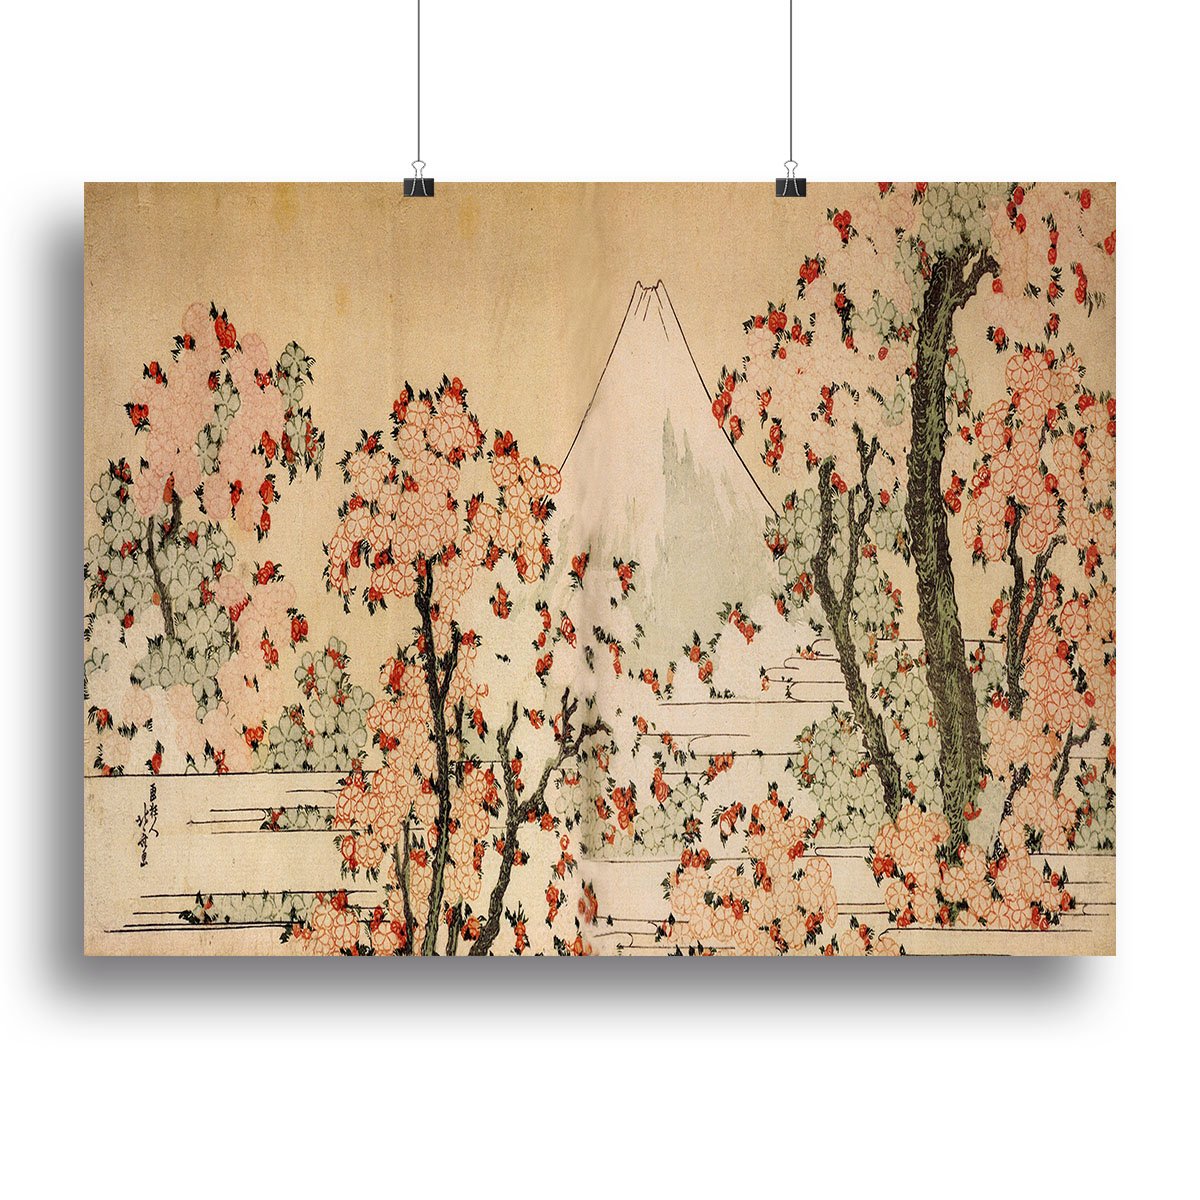 Mount Fuji behind cherry trees and flowers by Hokusai Canvas Print or Poster